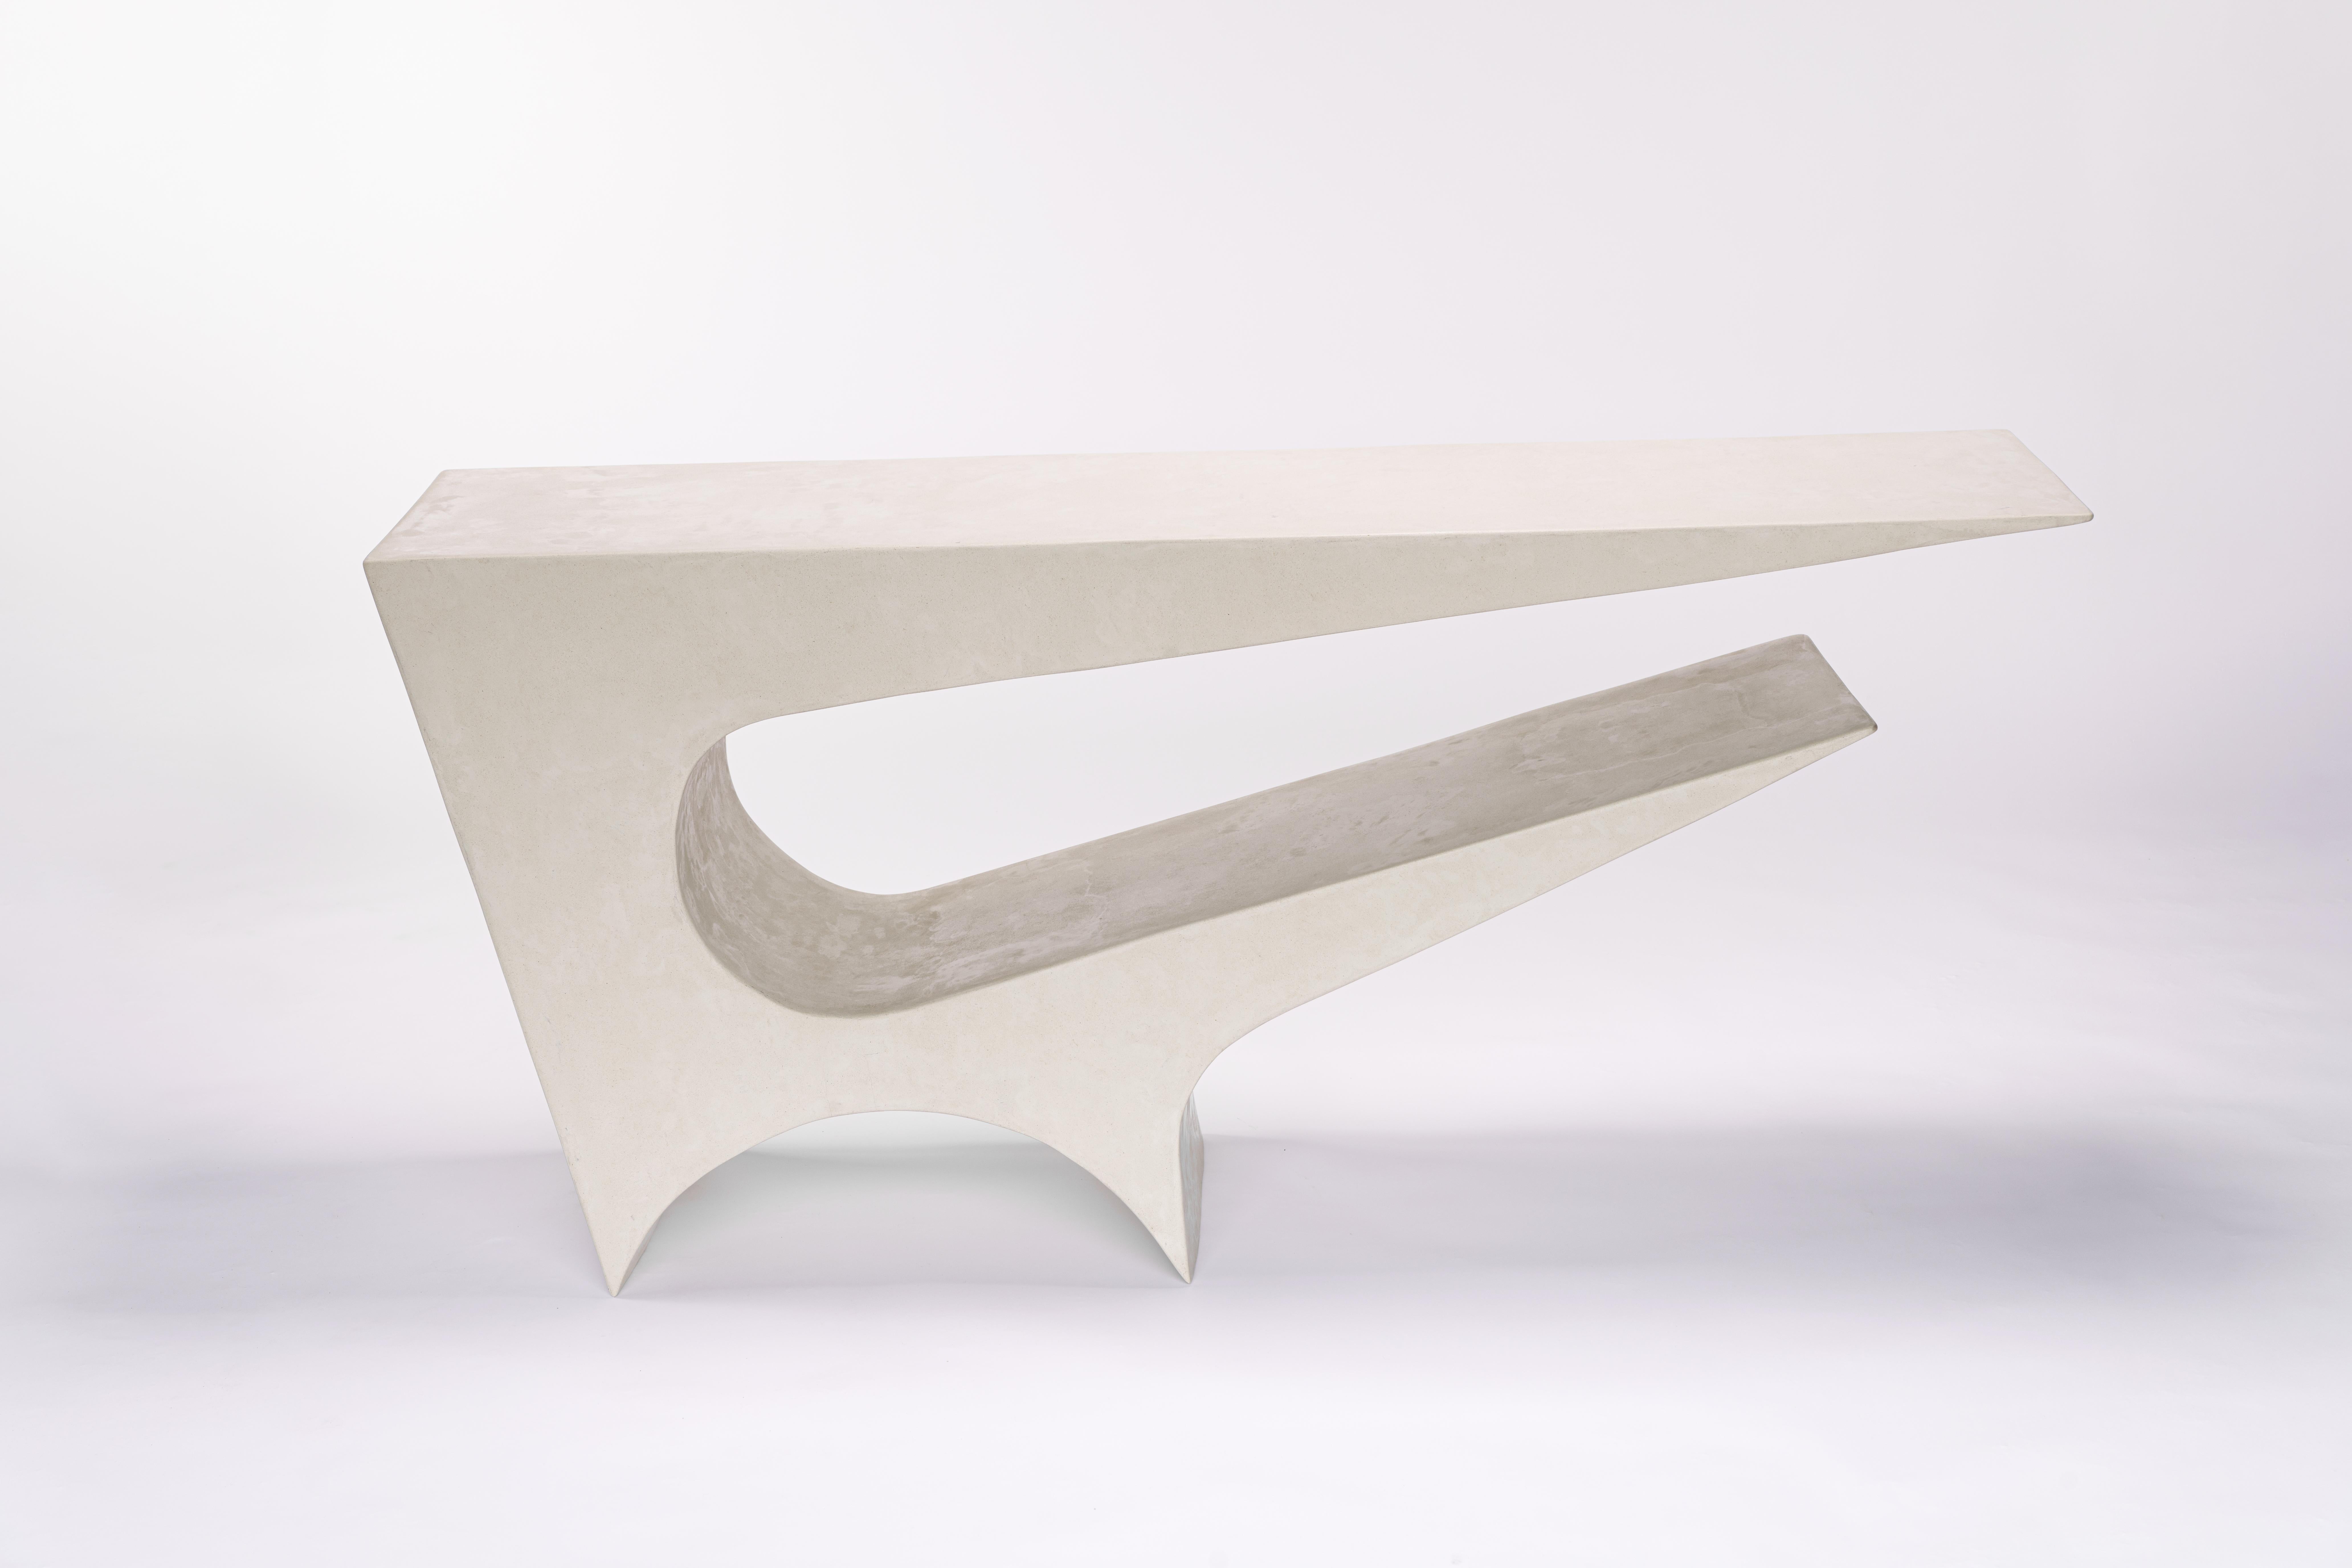 Star axis console in polished concrete by Neal Aronowitz Design
Dimensions: D 43.2 x W 169 x H 77.5 cm
Materials: Light beige concrete.
Custom sizes and colors are available. 

This modern, minimalist side table by award-winning artist/designer